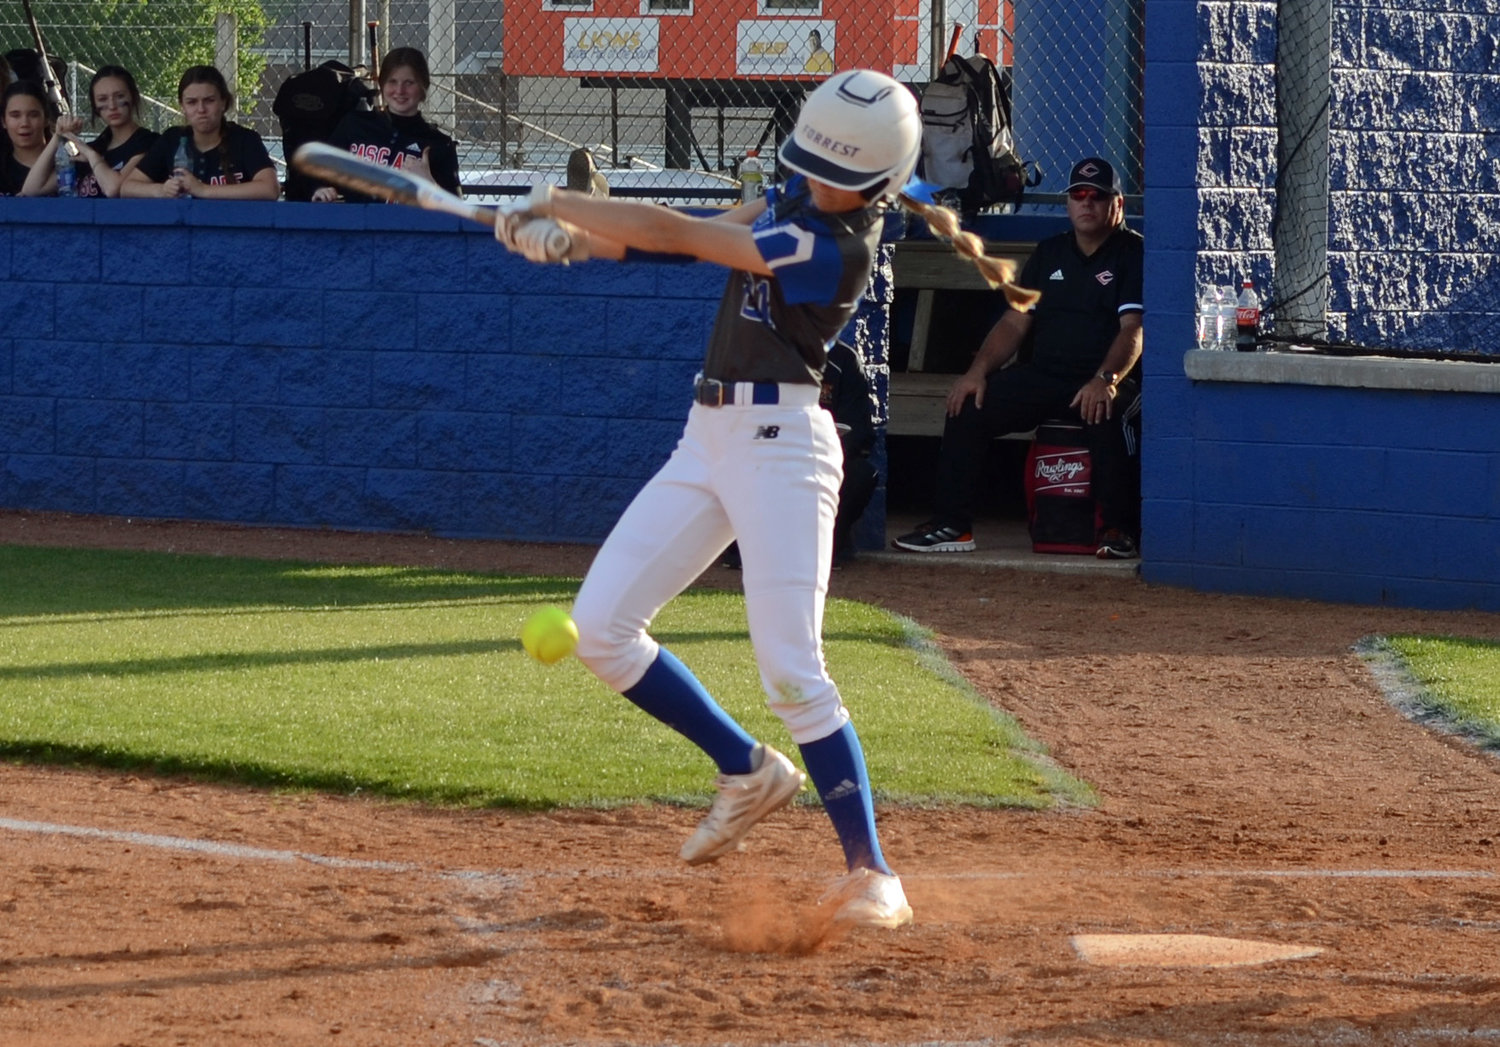 Maggie Daughrity executes the slap base hit in the bottom of the second inning.